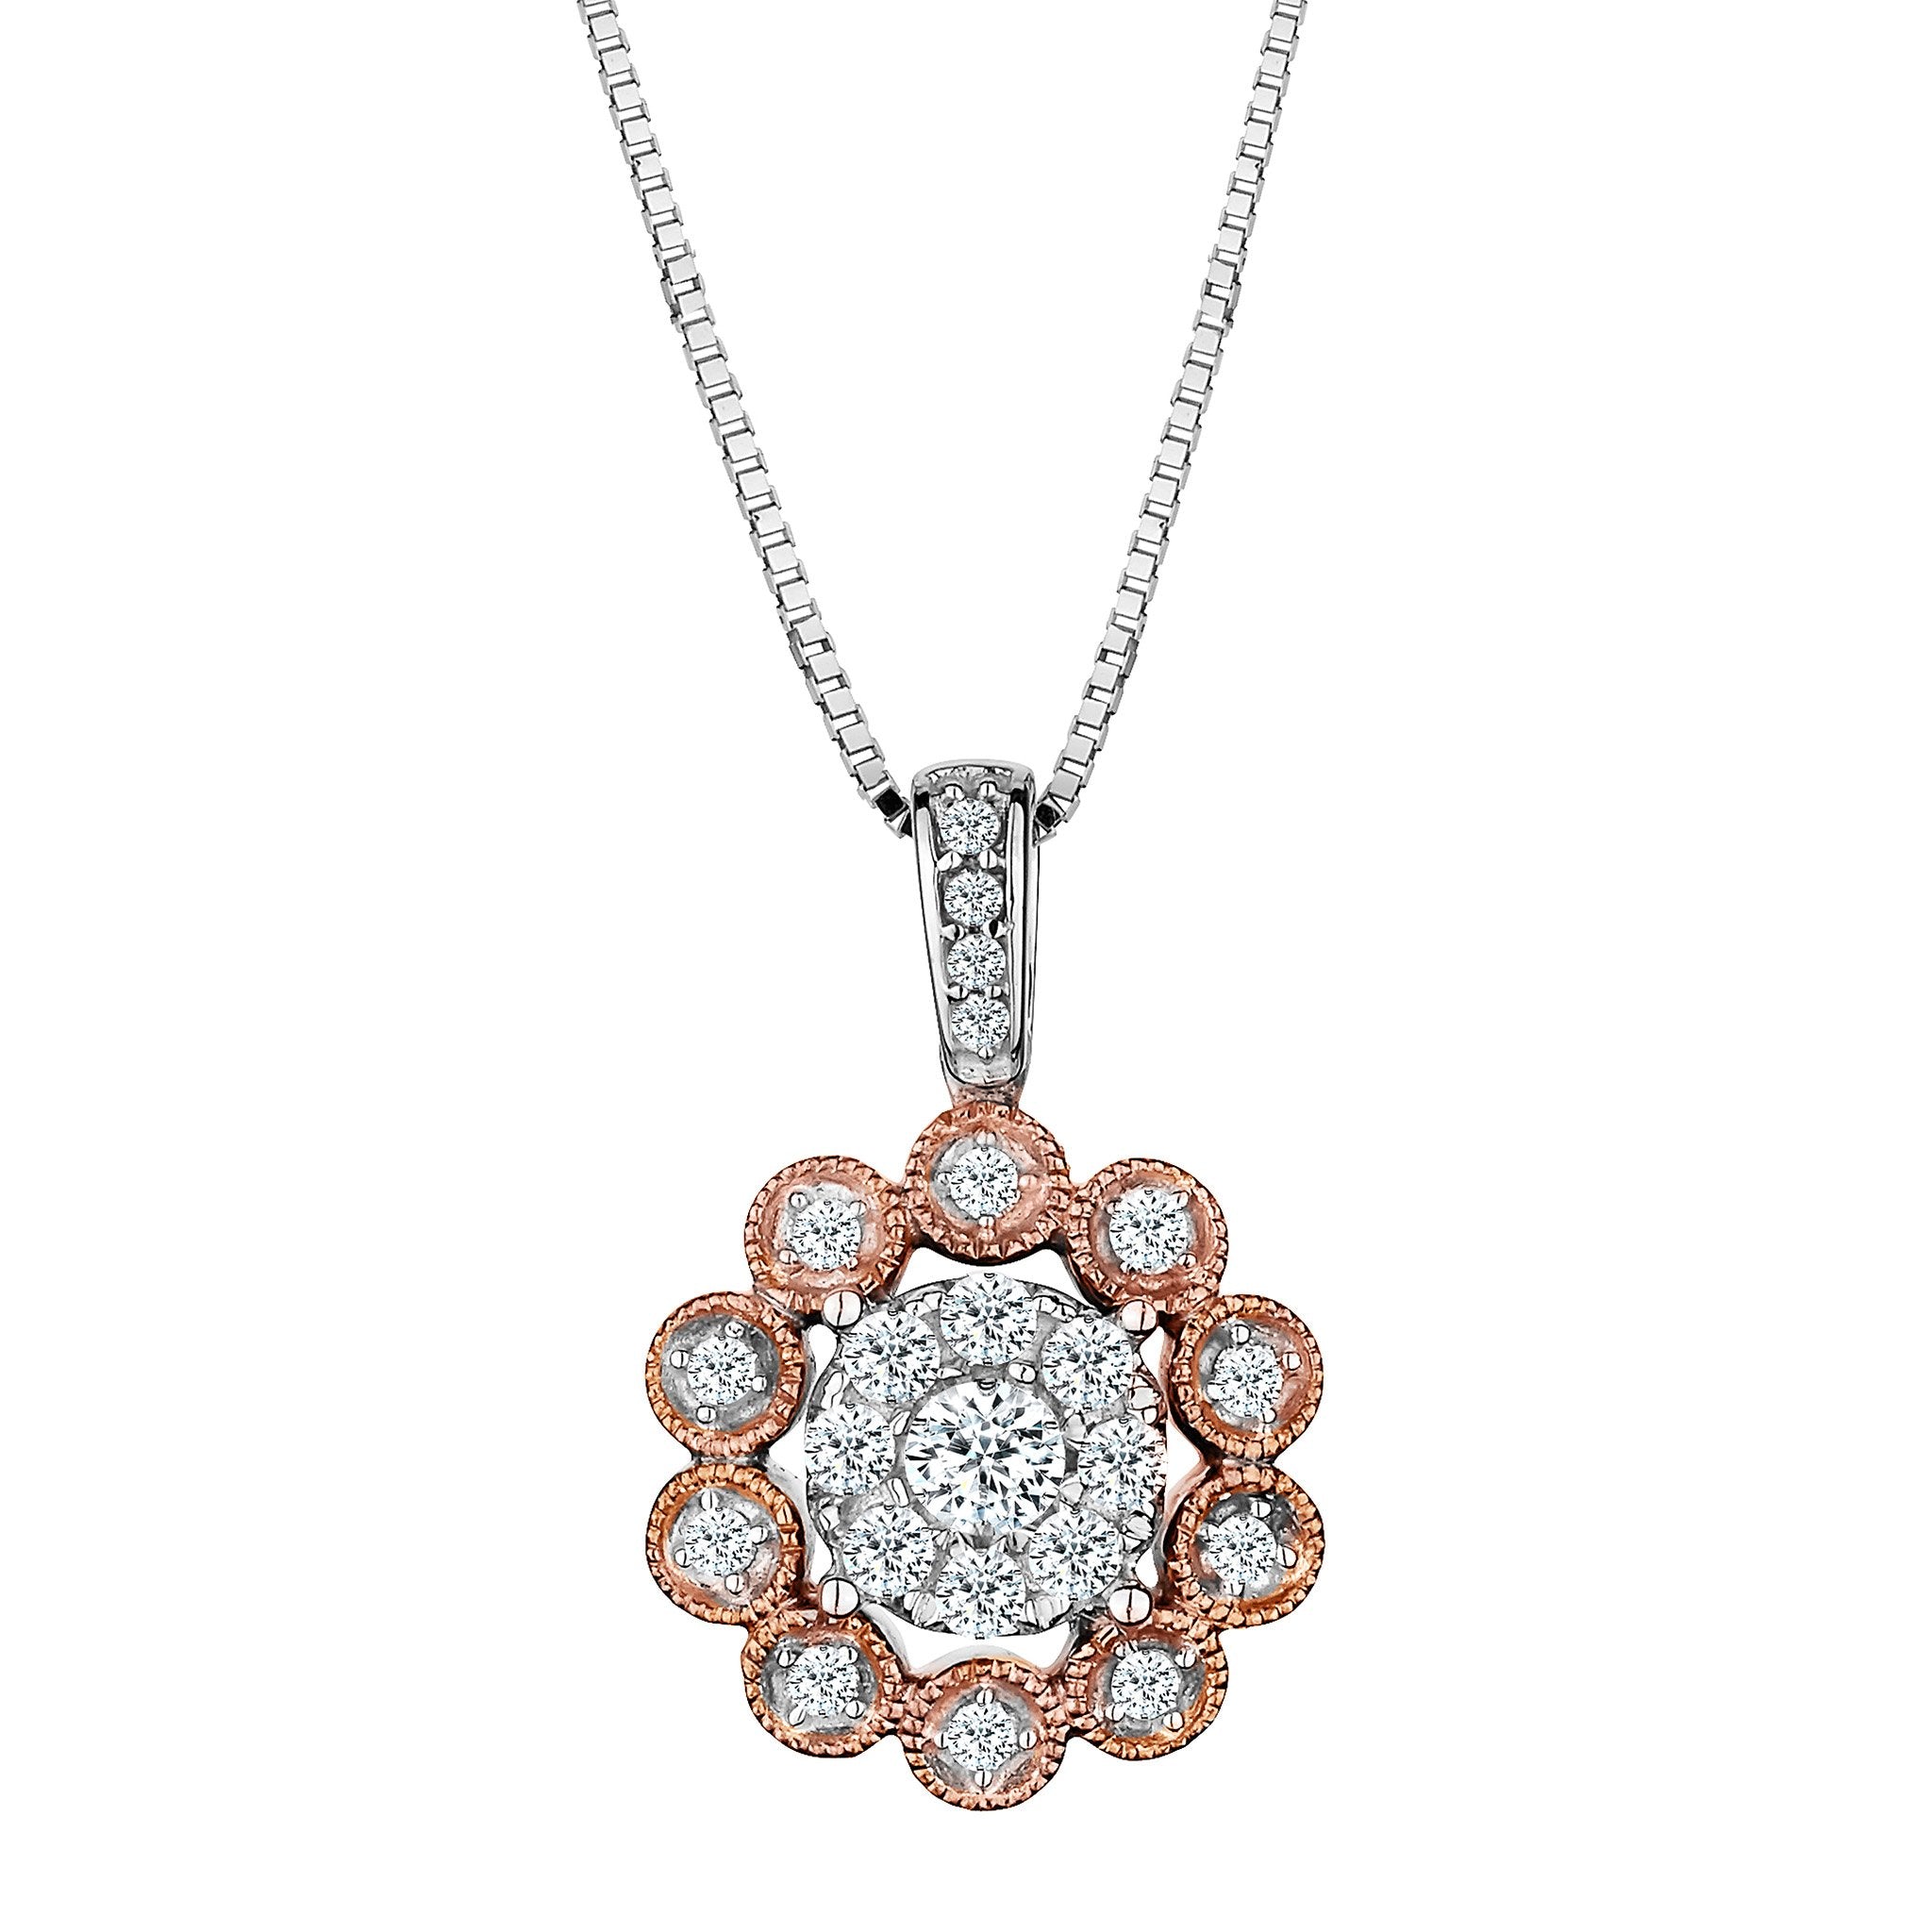 .17 Carat Diamond Pendant,  10kt Rose Gold And White Gold (Two Tone). Necklaces and Pendants. Griffin Jewellery Designs.